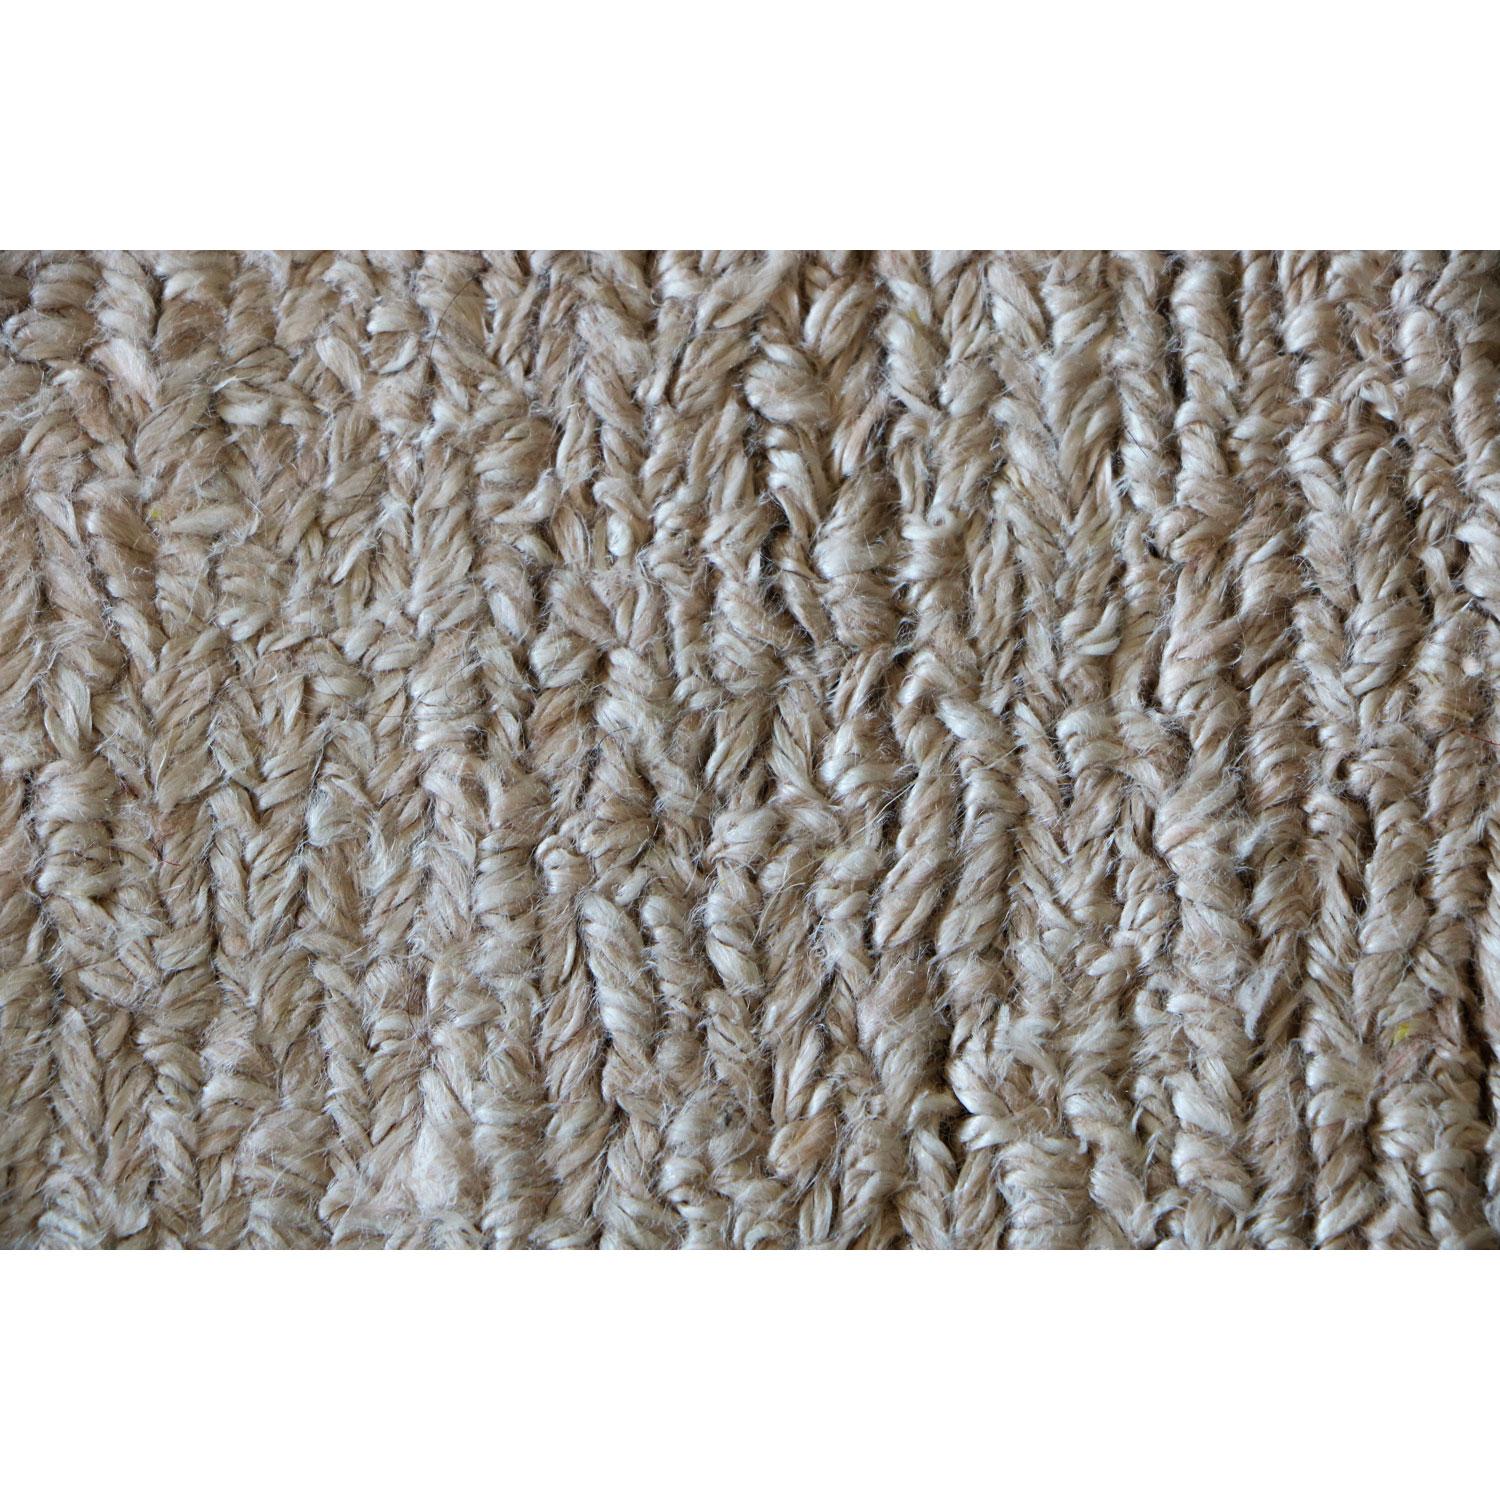 Indian 21st Cent Neutral Tones Linen Rug for Beach Houses by Deanna Comellini 120x300cm For Sale